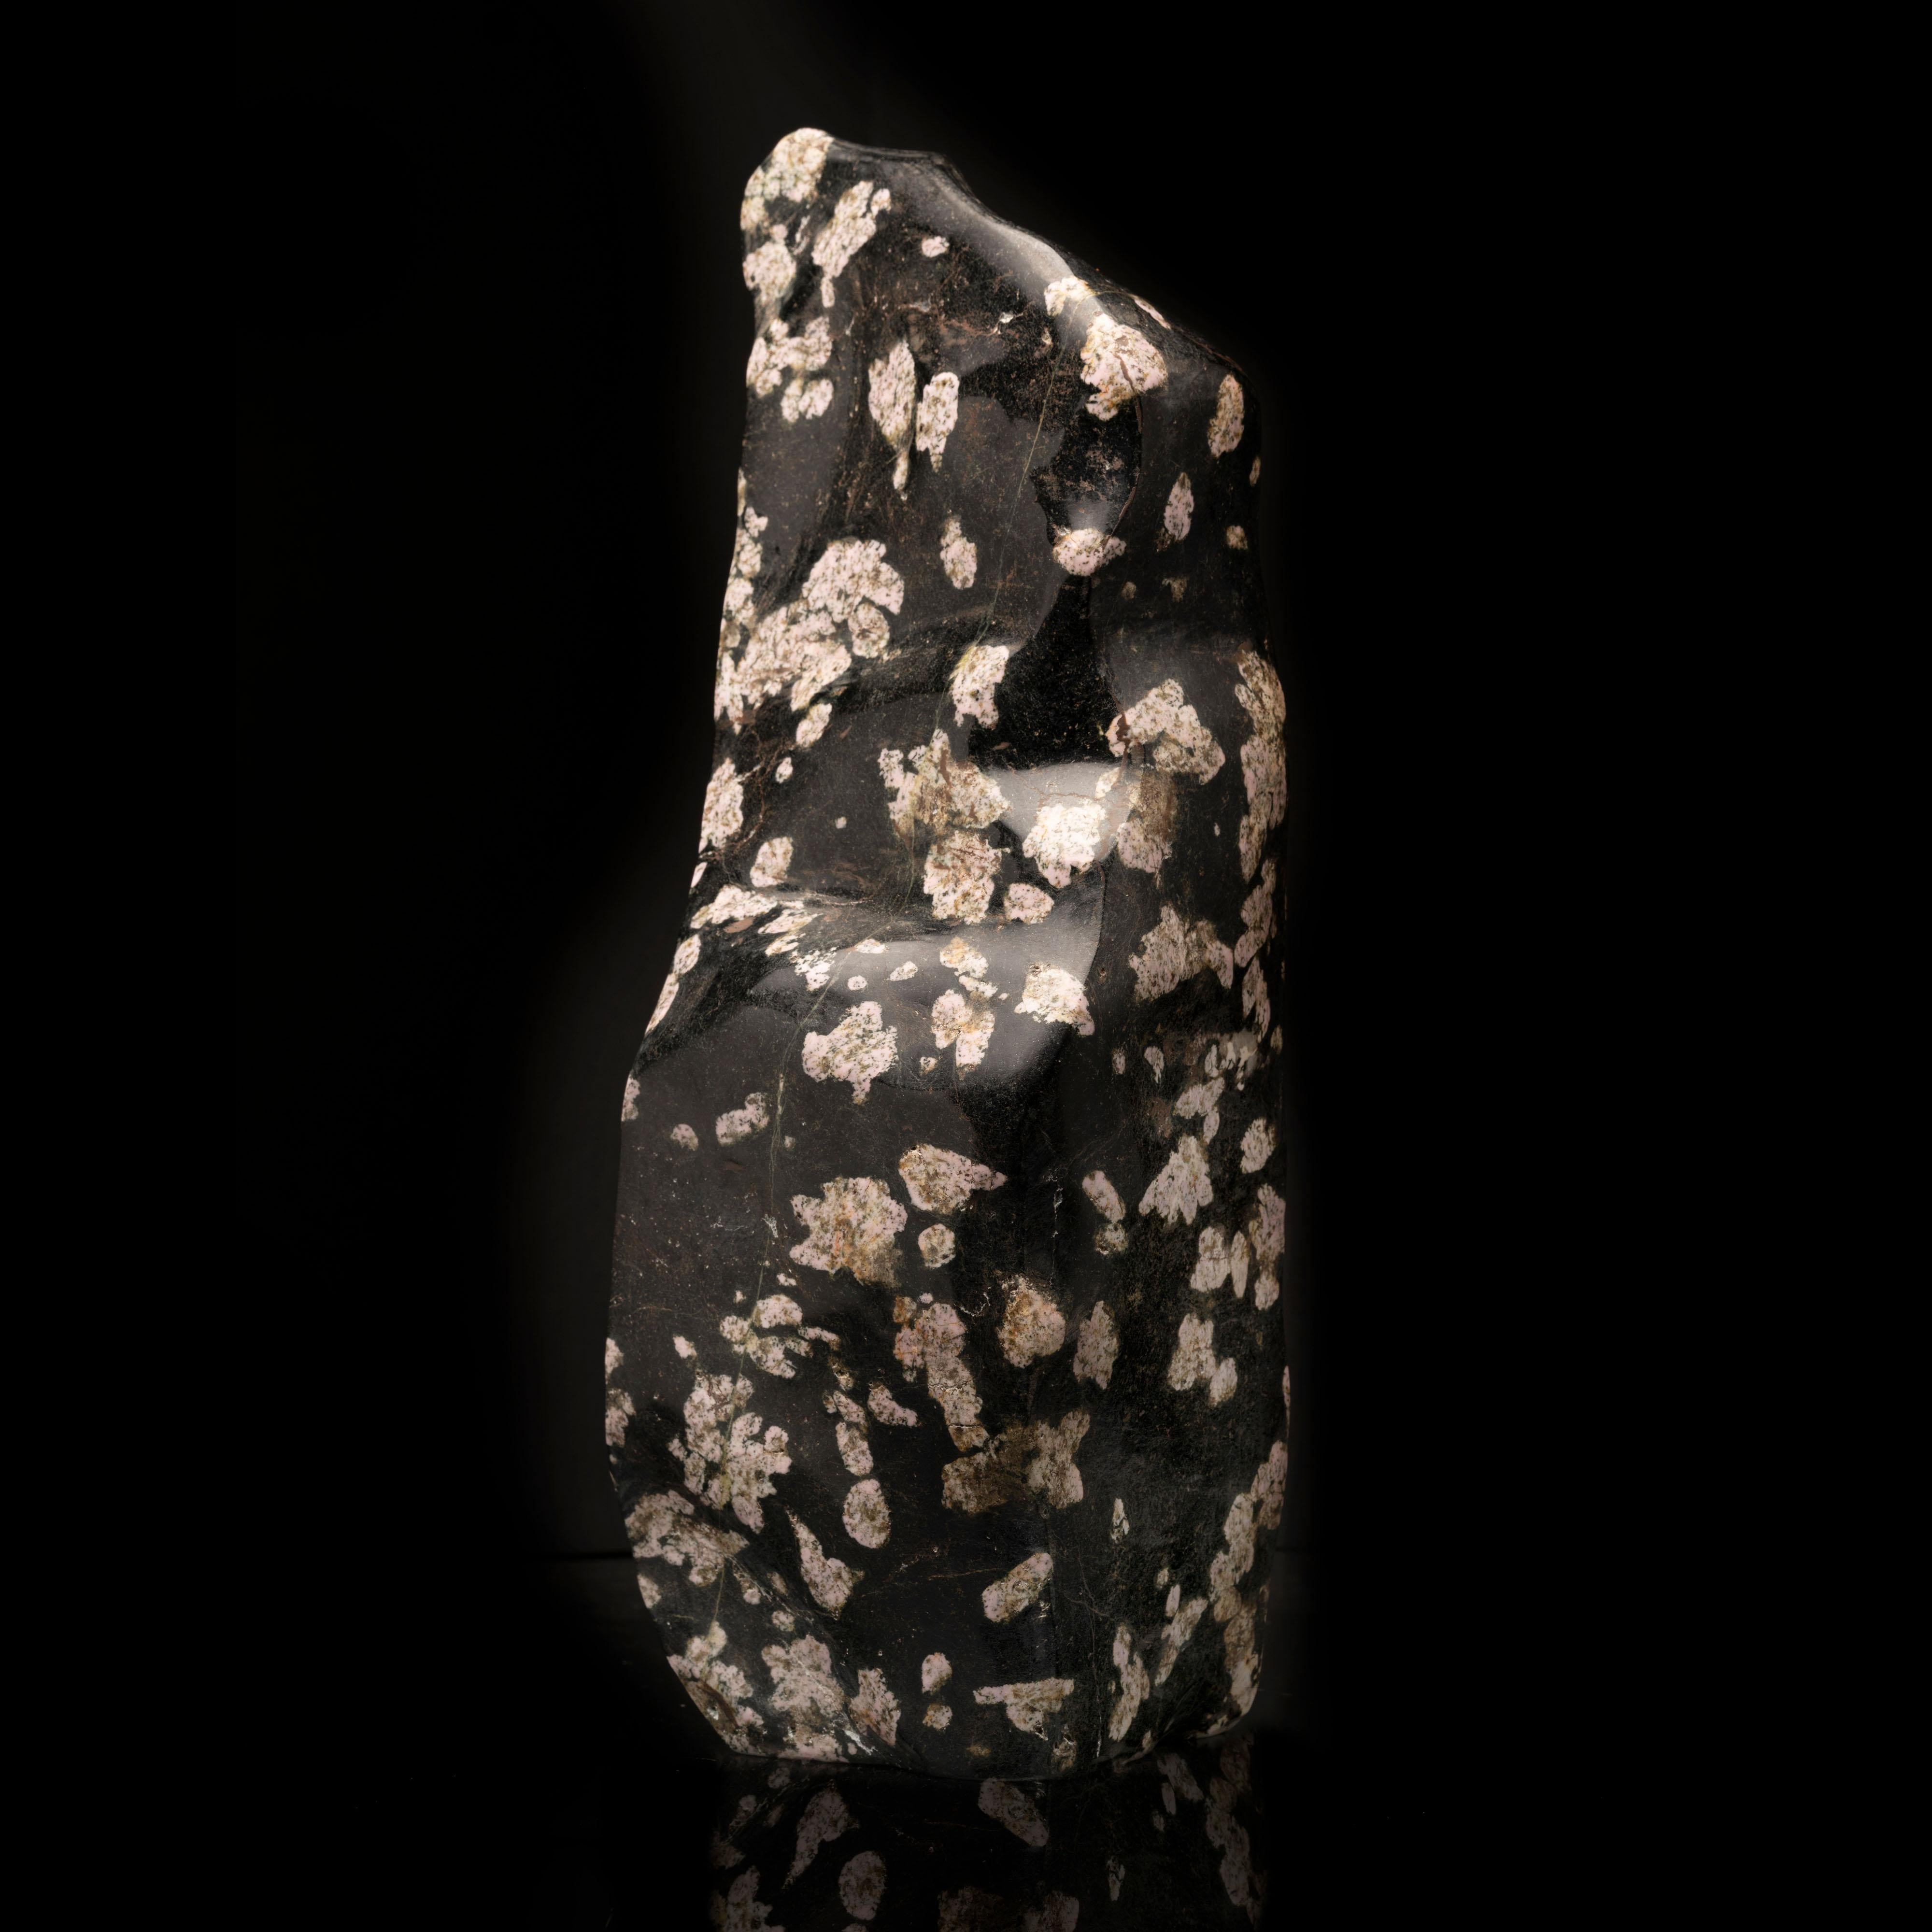 This stately black jade freeform has been expertly hand-polished and features blossoms of pink zoisite on a juxtaposed inky black jade backdrop. A visually fascinating piece sure to add interest to any home, office, or cabinet.

Dimensions: 5-3/8”W